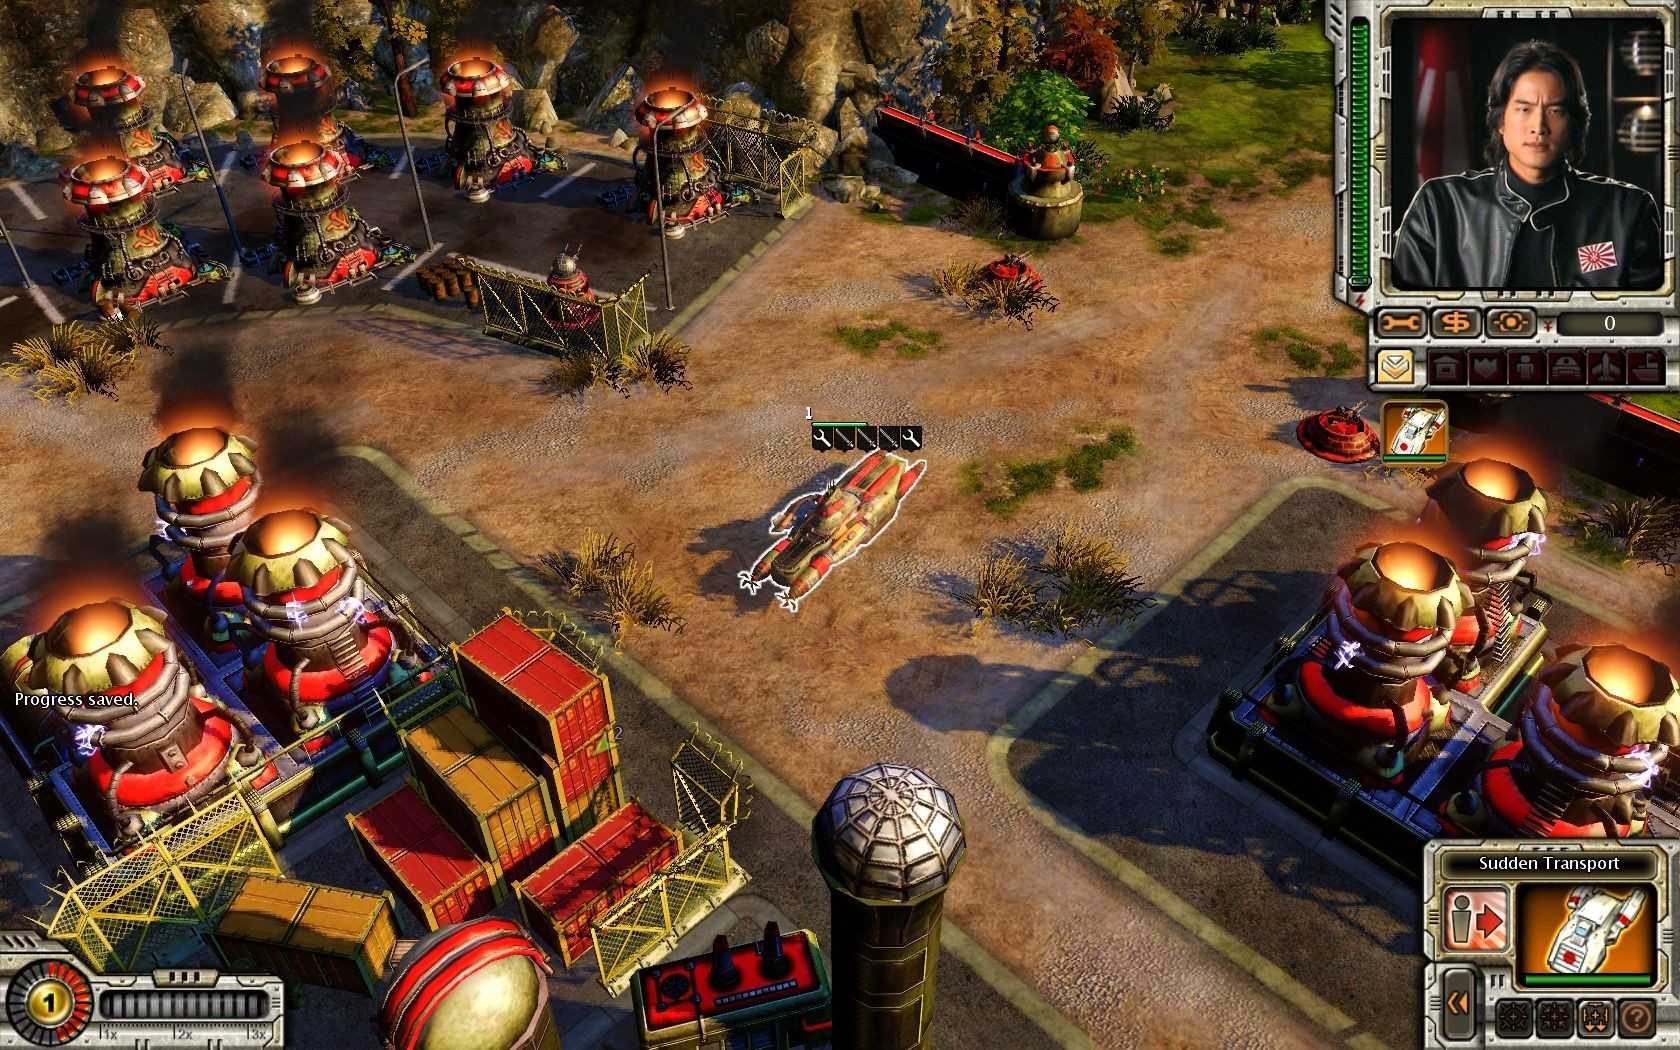 Игры ред стар. Command & Conquer: Red Alert 3. Command Conquer 3 Red Alert 3. Игра Red Alert 5. Command & Conquer: Red Alert 3 - Uprising.